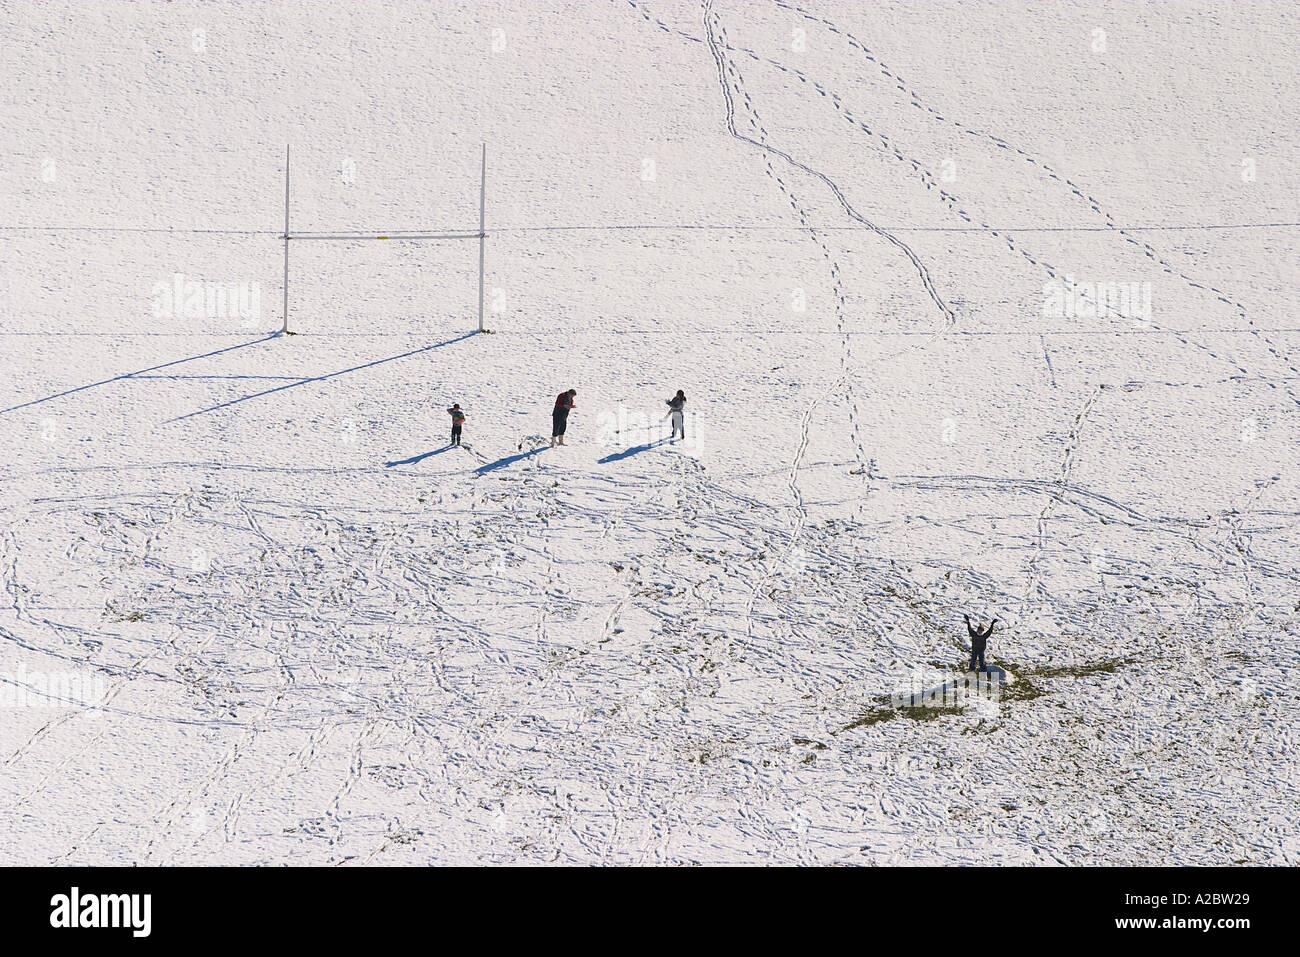 People playing in snow Dunedin South Island New Zealand aerial Stock Photo